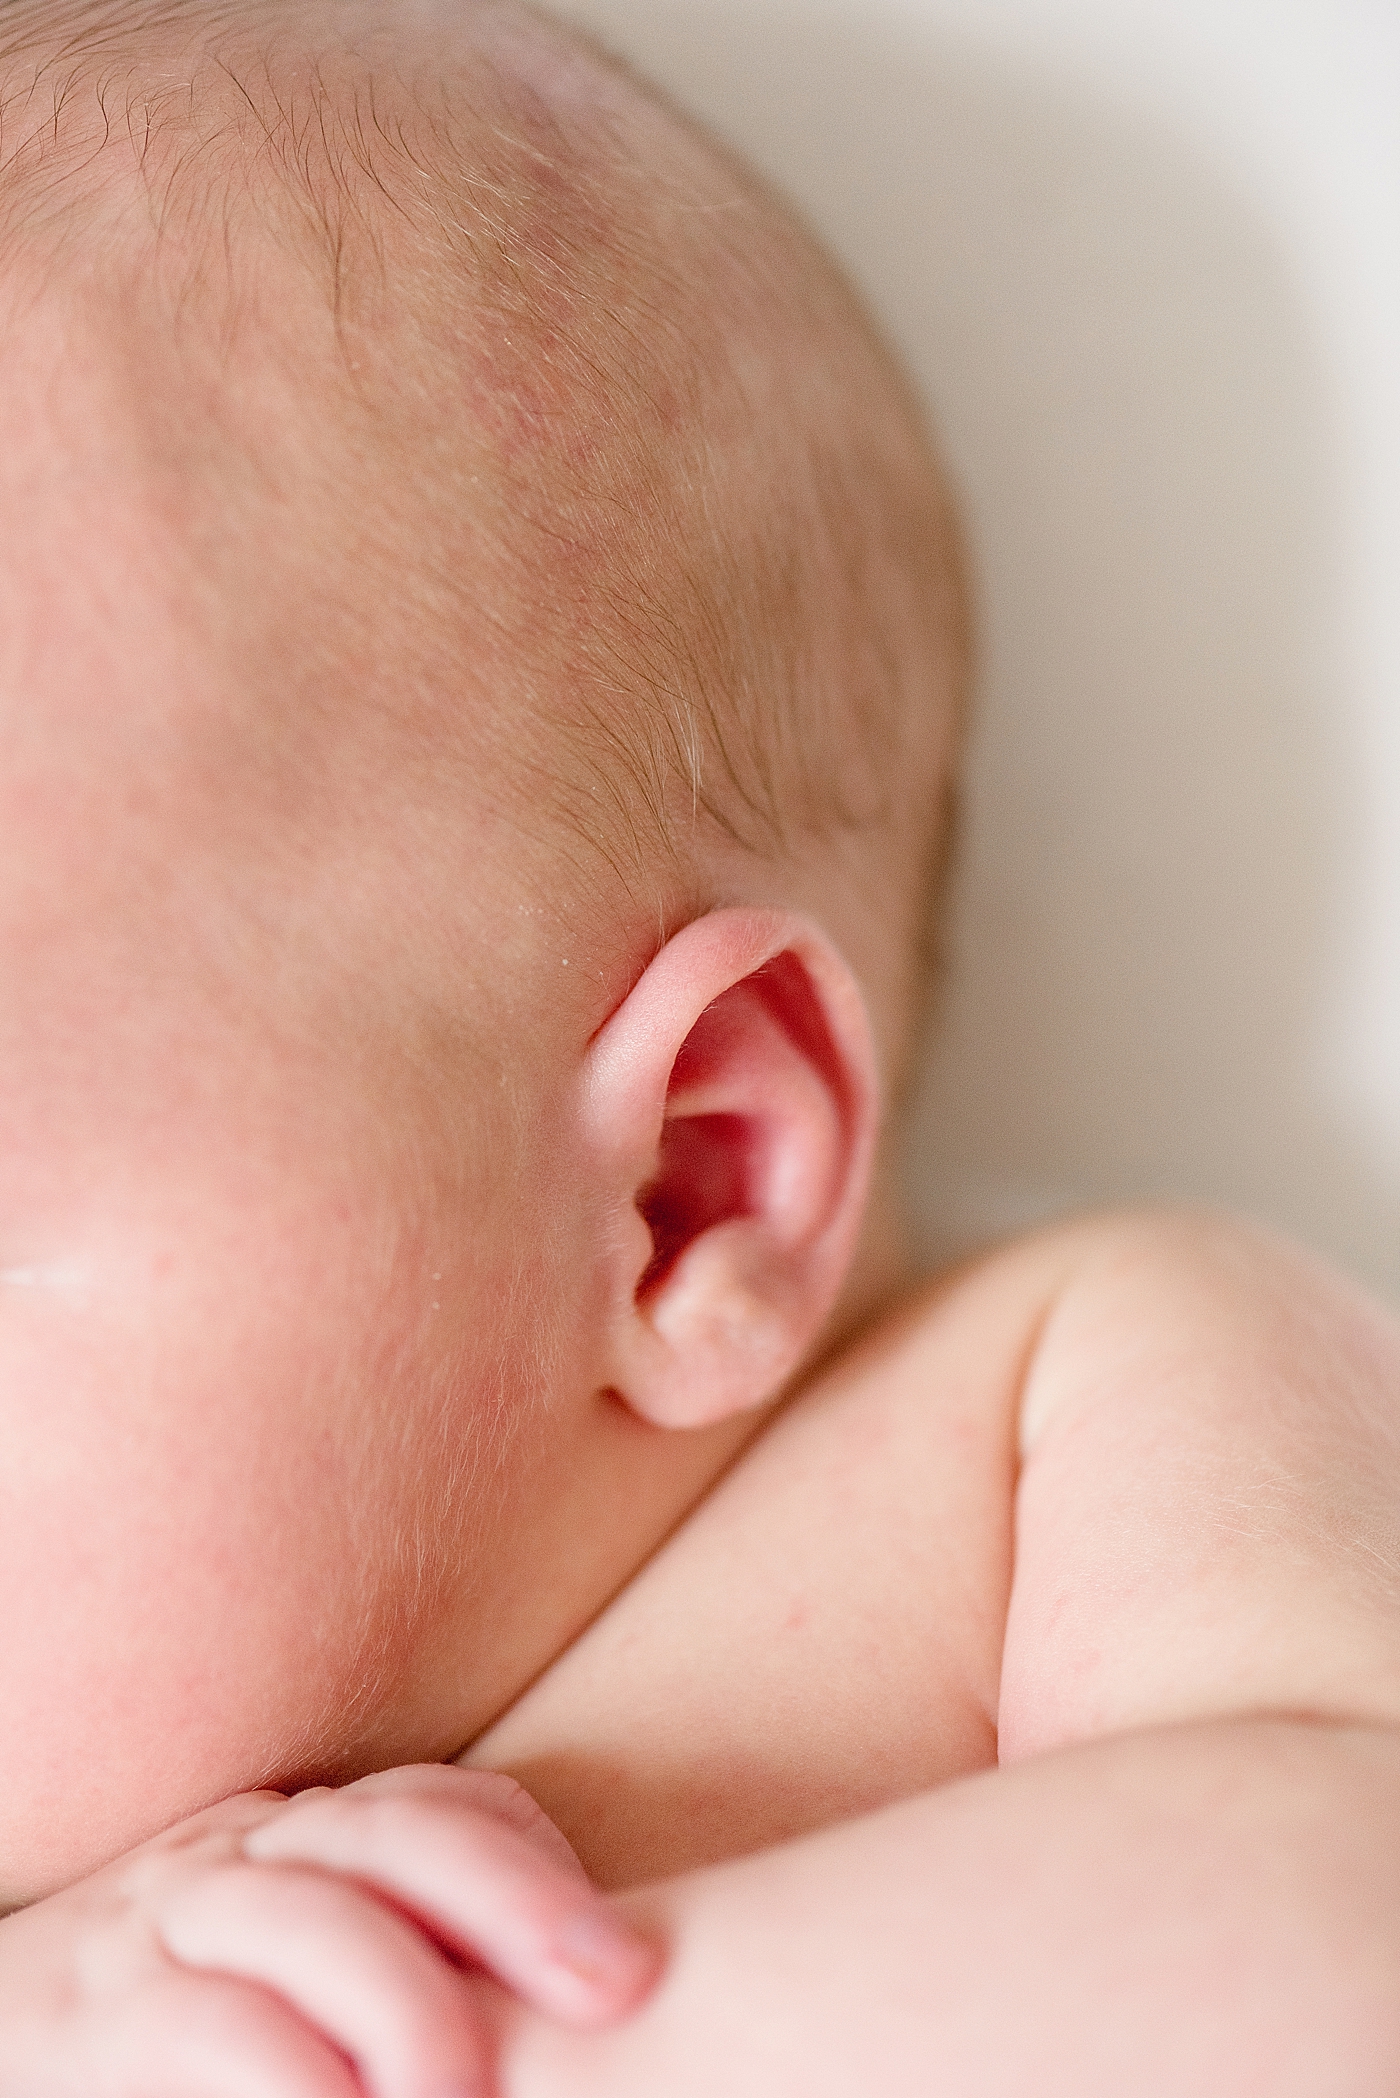 Newborn baby details of tiny ear | Photo by Anna Wisjo Photography